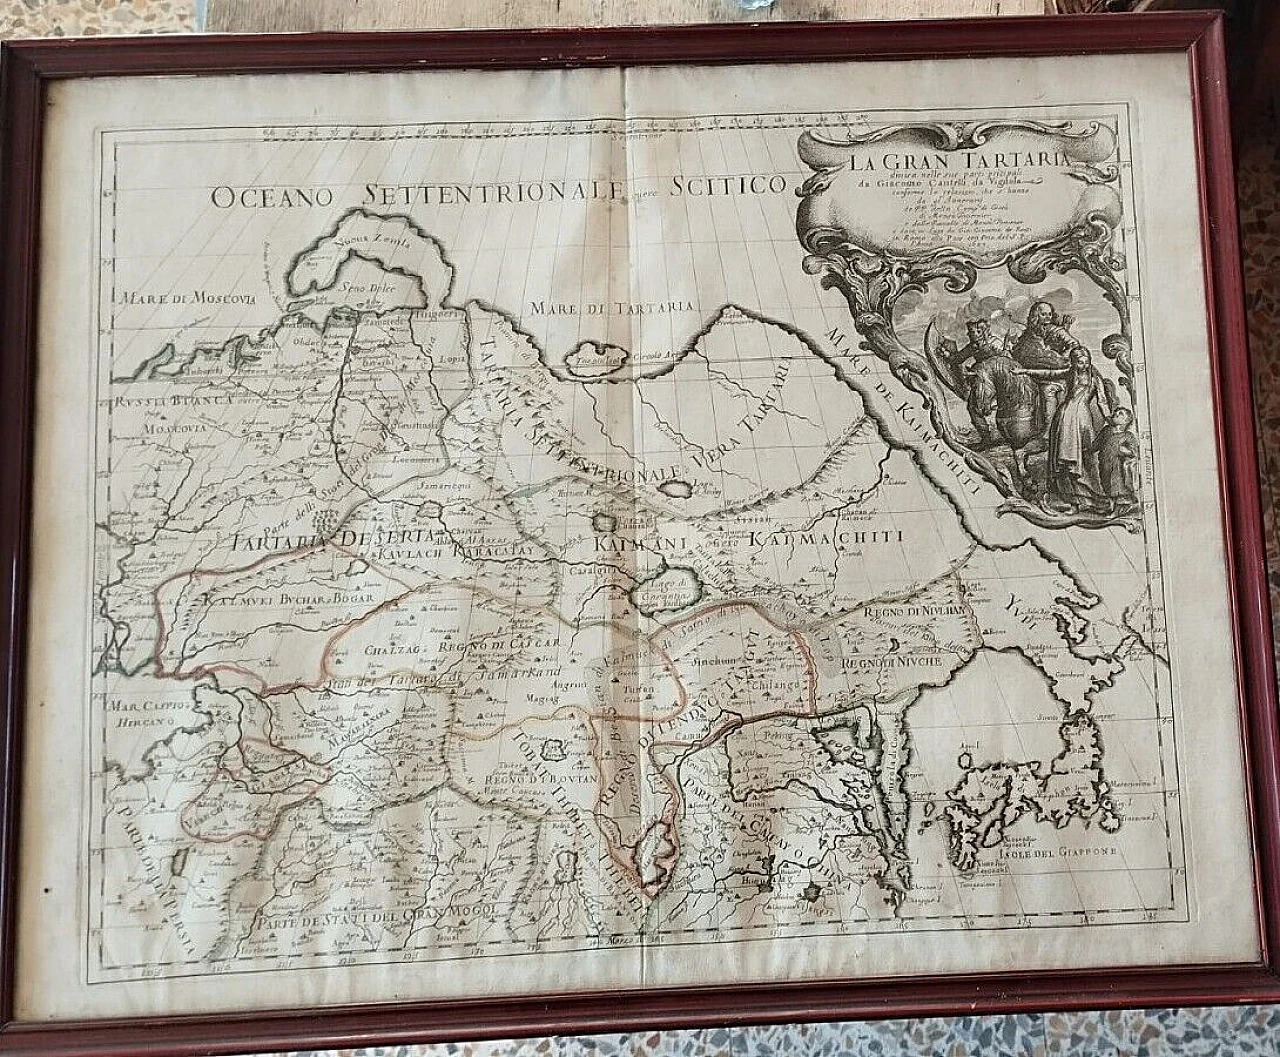 The Great Tartary map by G. G. De Rossi and G. Cantelli, 1683 10